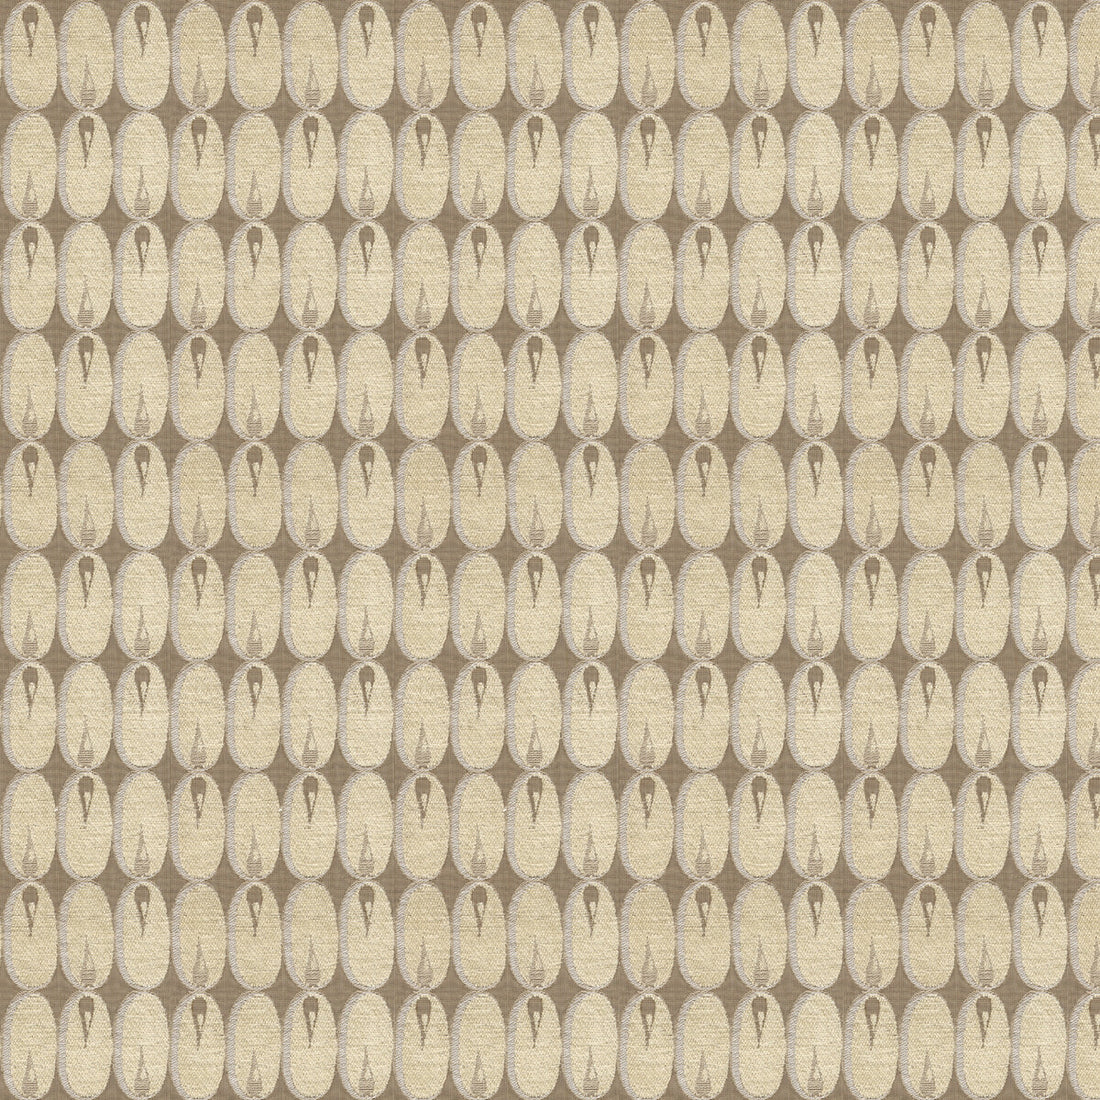 Oval Flame fabric in white color - pattern GWF-2924.116.0 - by Lee Jofa Modern in the Allegra Hicks II collection